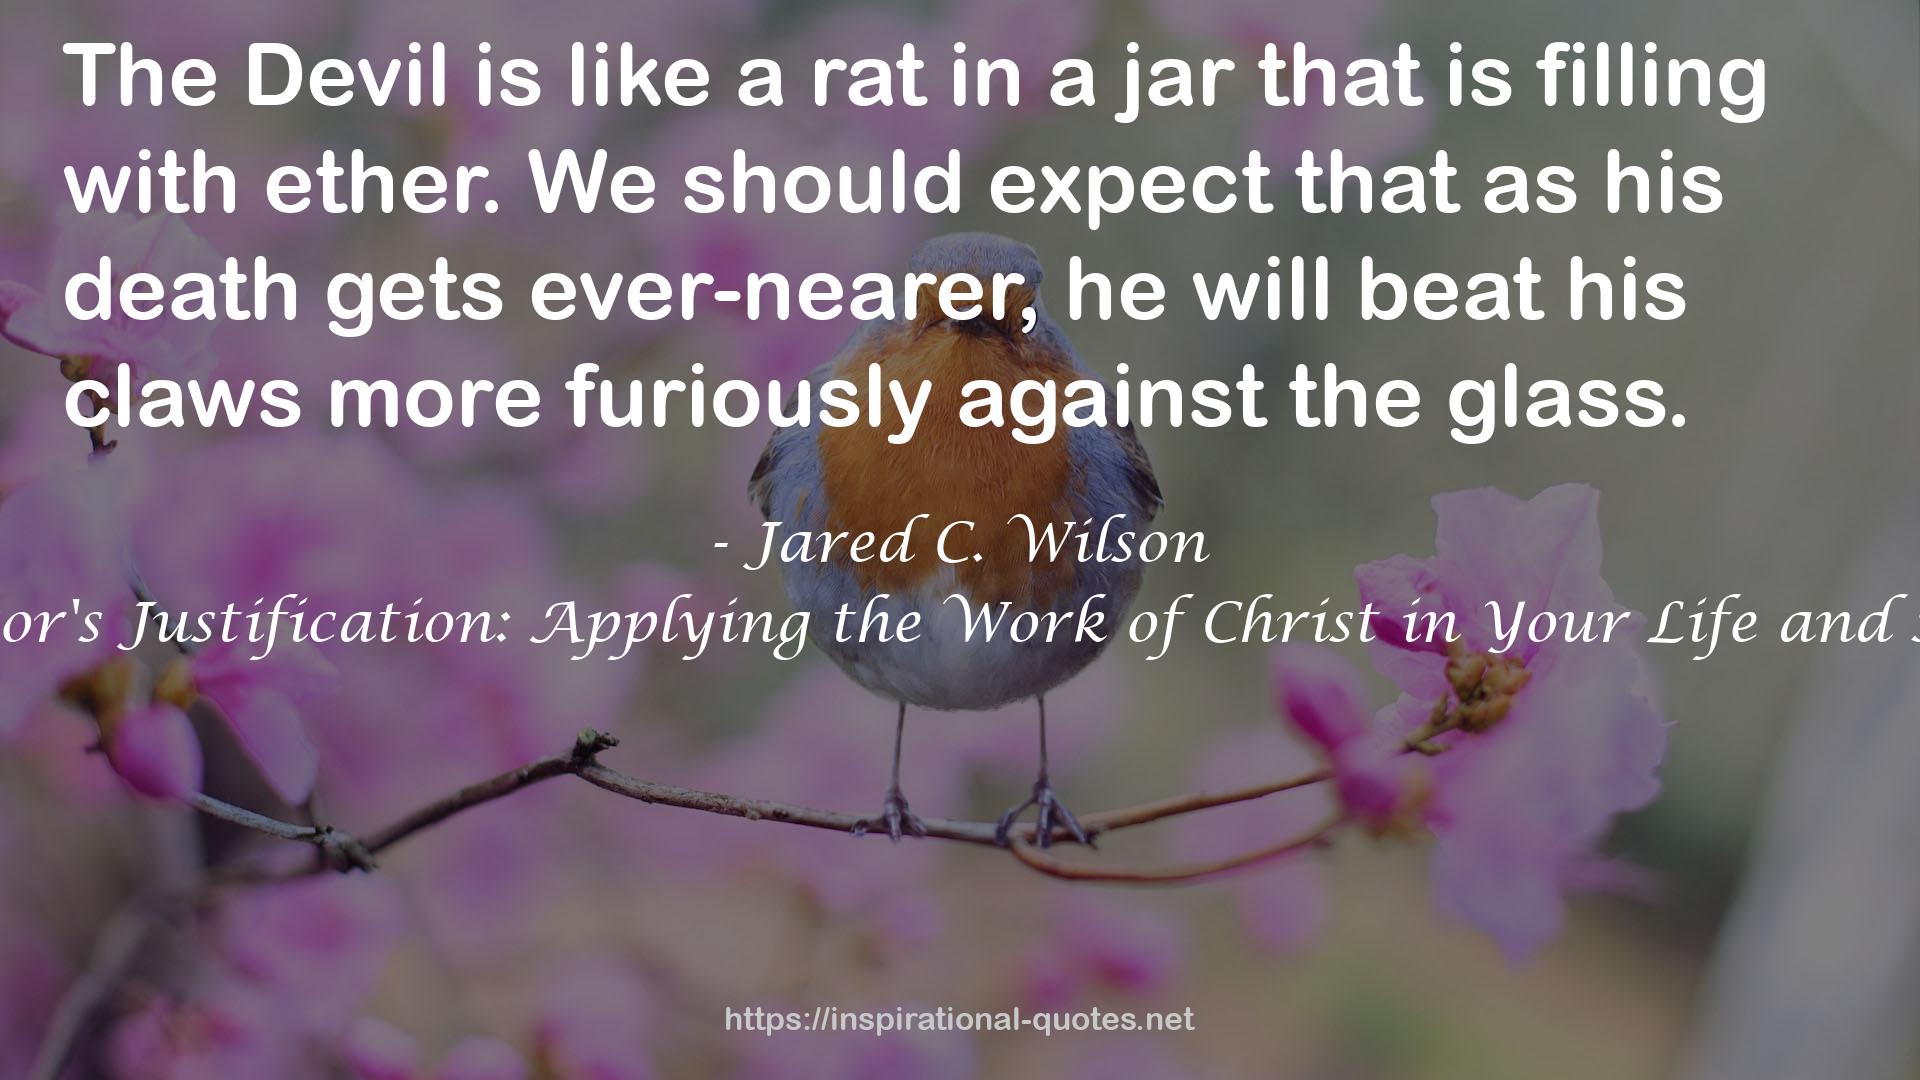 The Pastor's Justification: Applying the Work of Christ in Your Life and Ministry QUOTES